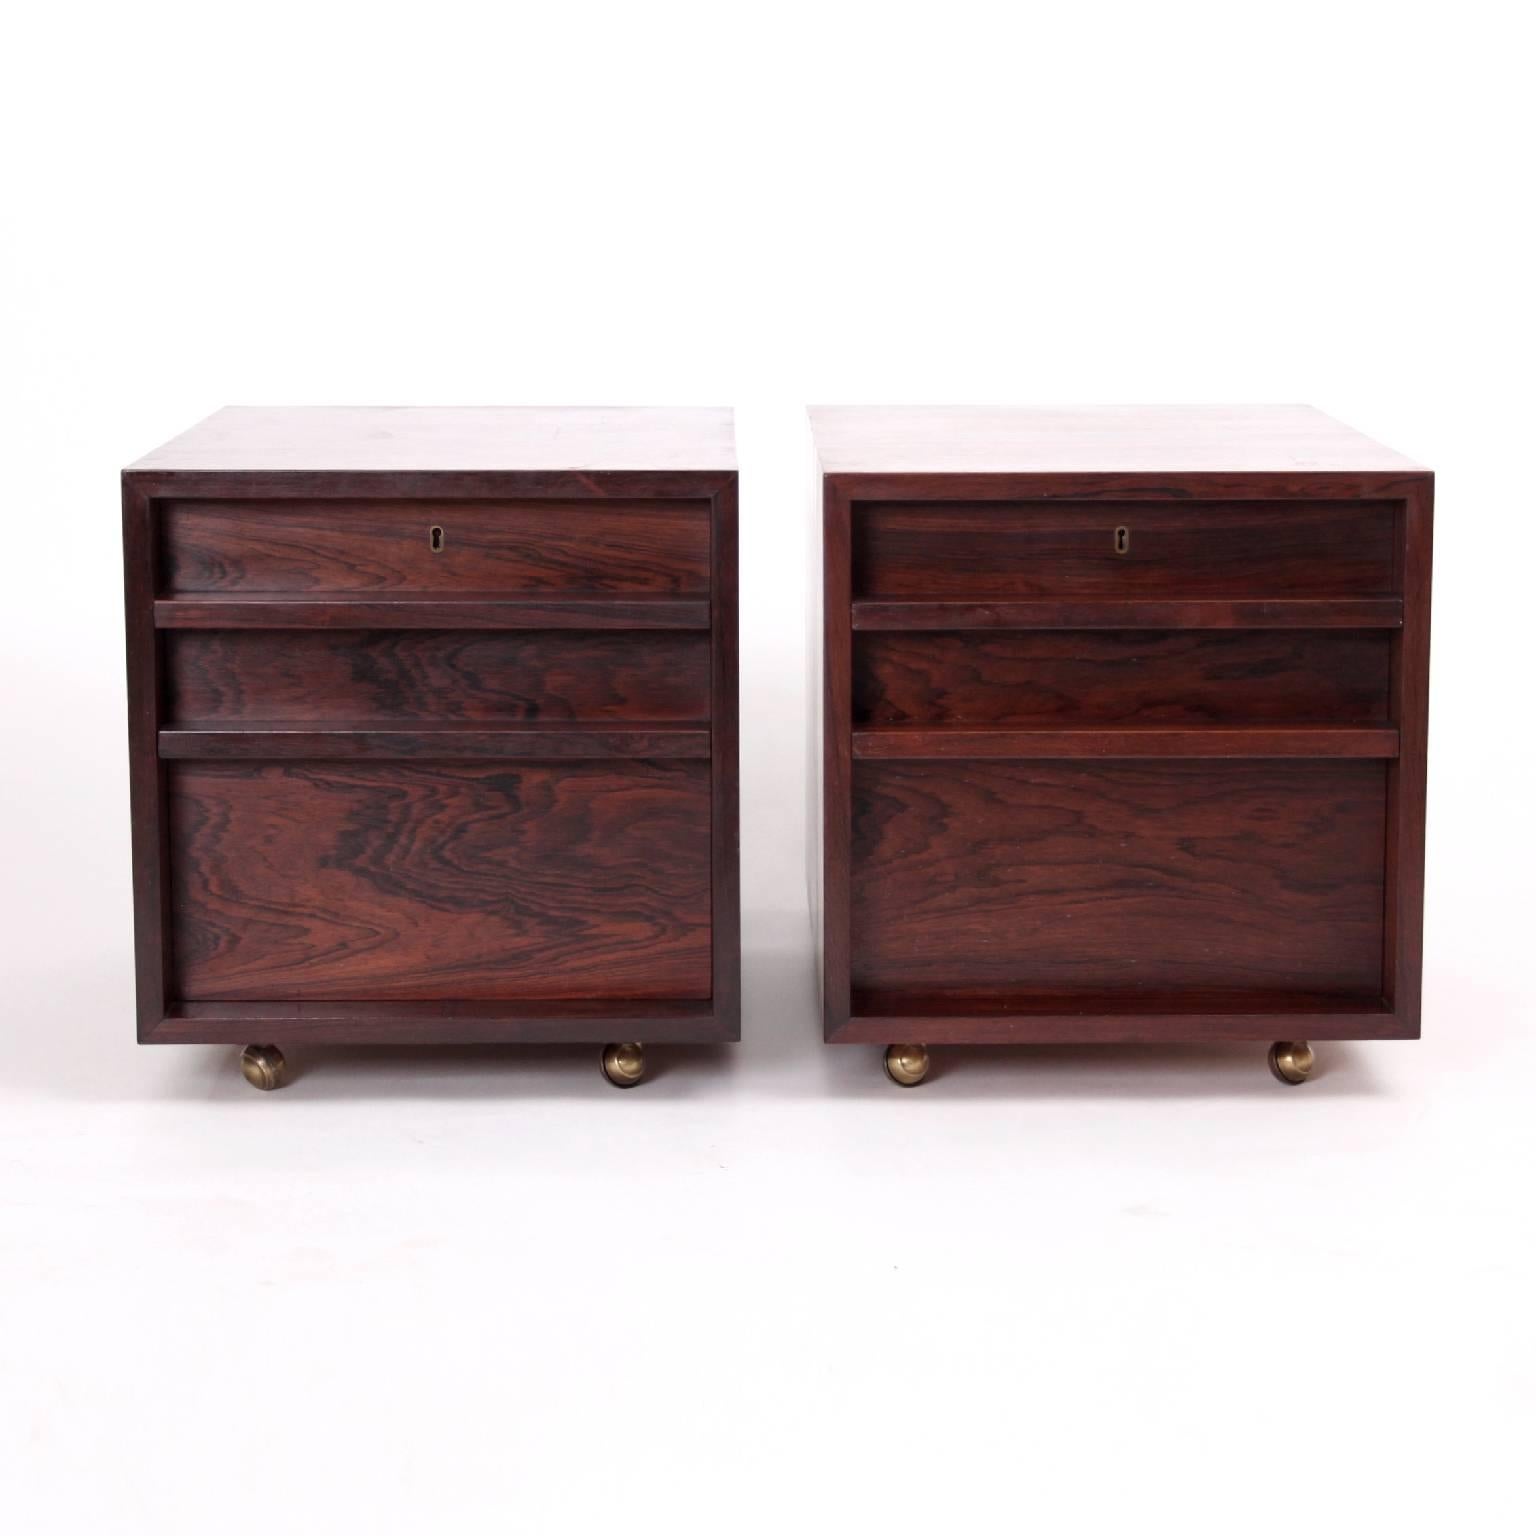 A rare pair of Brazilian rosewood cabinets or side tables designed by Bodil Kjaer in 1959.

With rosewood both front and back. Front with two locking drawers. Mounted on brass casters.

Produced by E. Pedersen & Søn 1960s.

Excellent